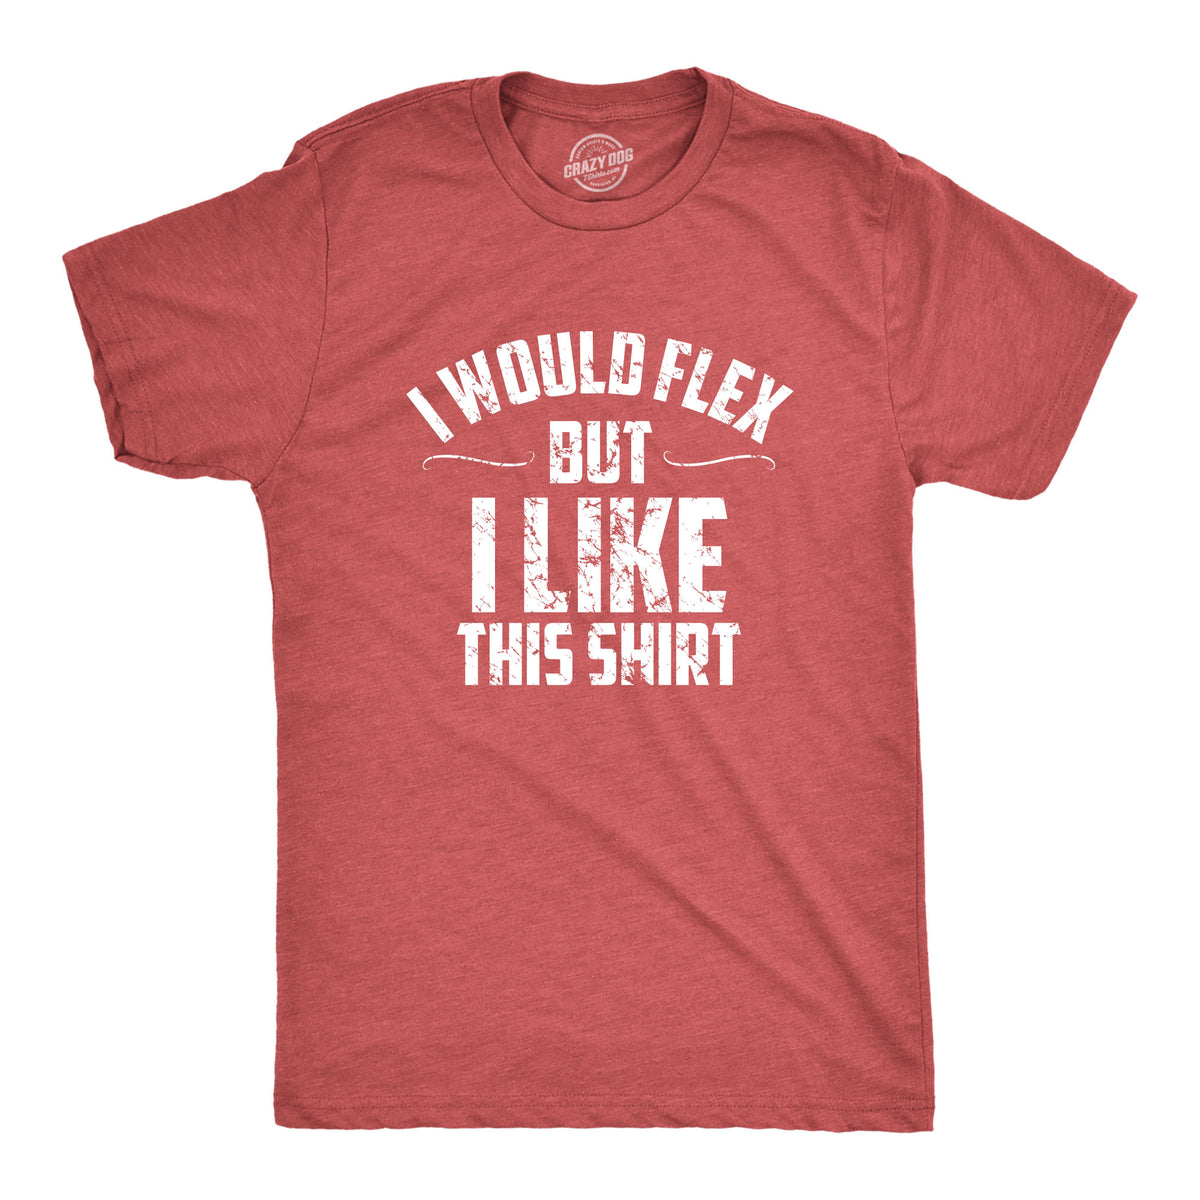 Funny Heather Red I Would Flex But I Like This Shirt Mens T Shirt Nerdy Fitness Tee